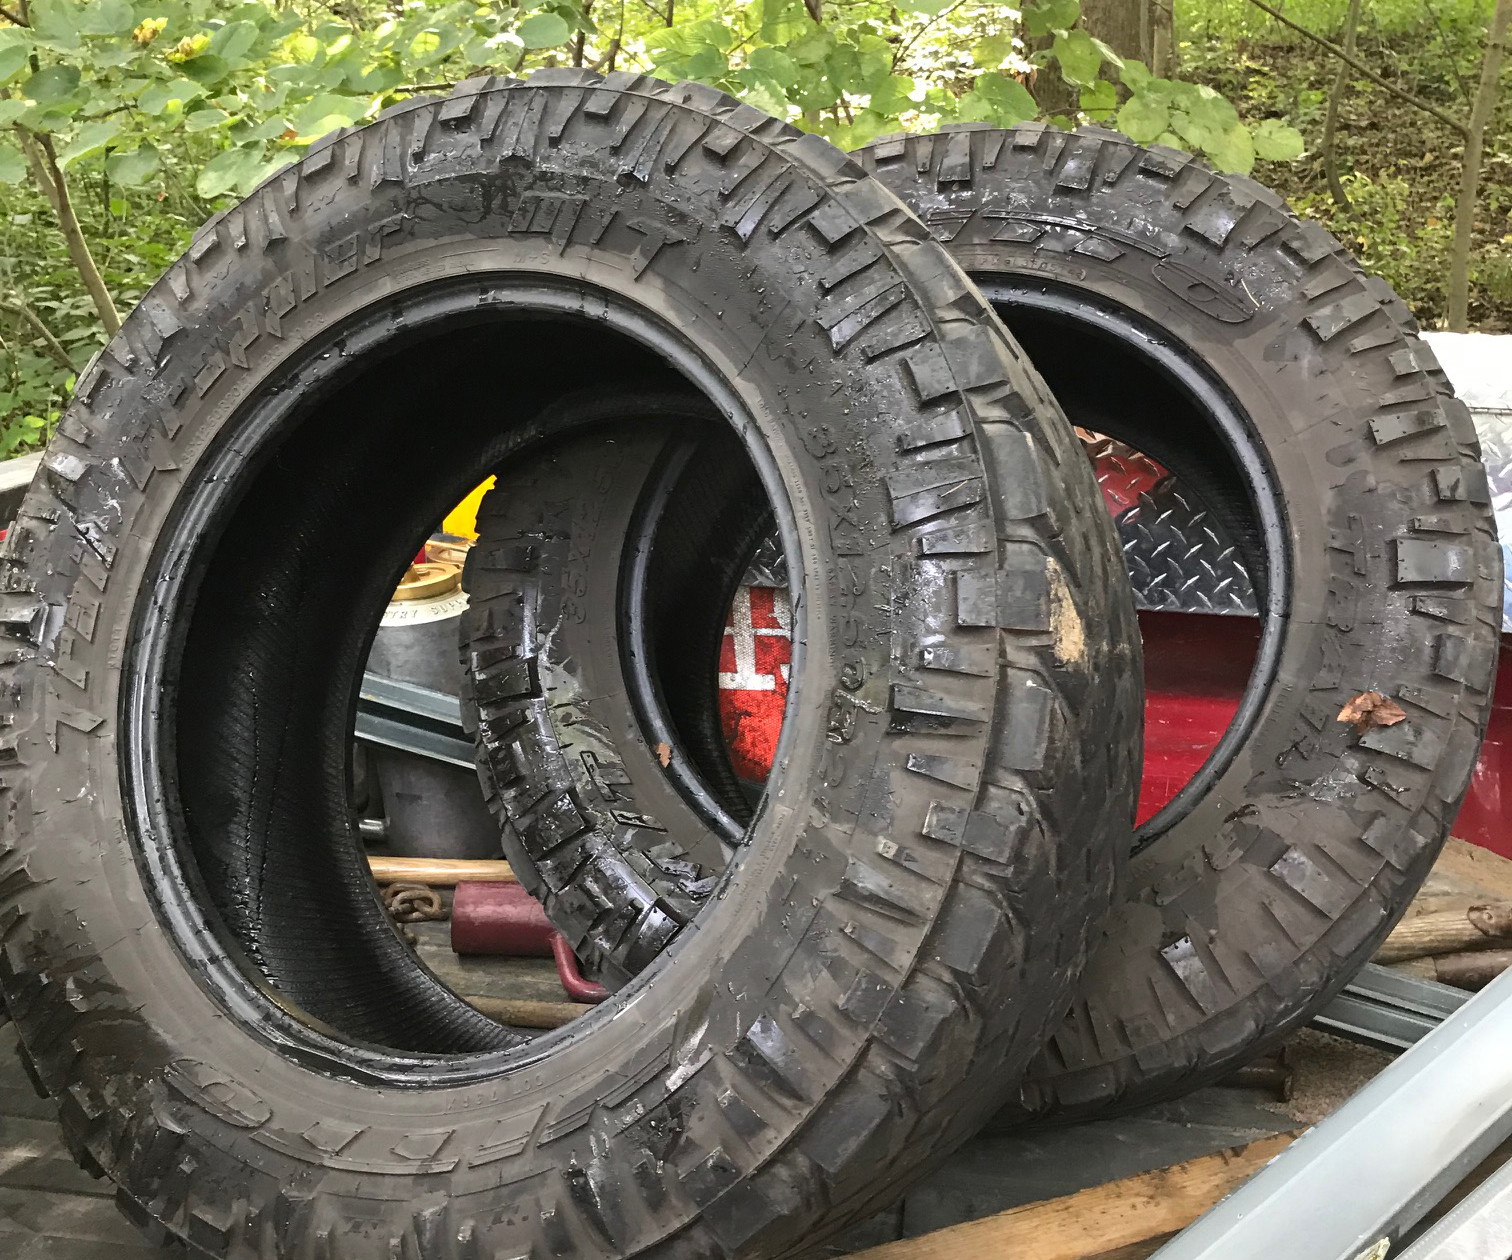 Two rubber tires found in a preserve.